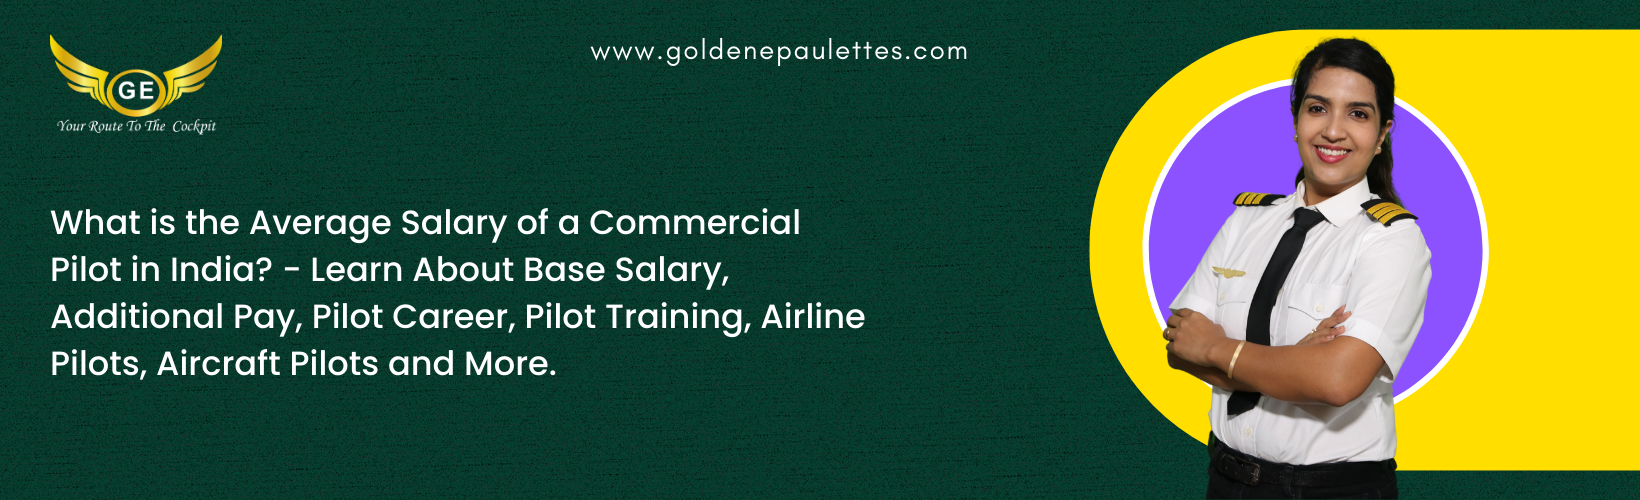 What is the Salary of a Commercial Pilot in India